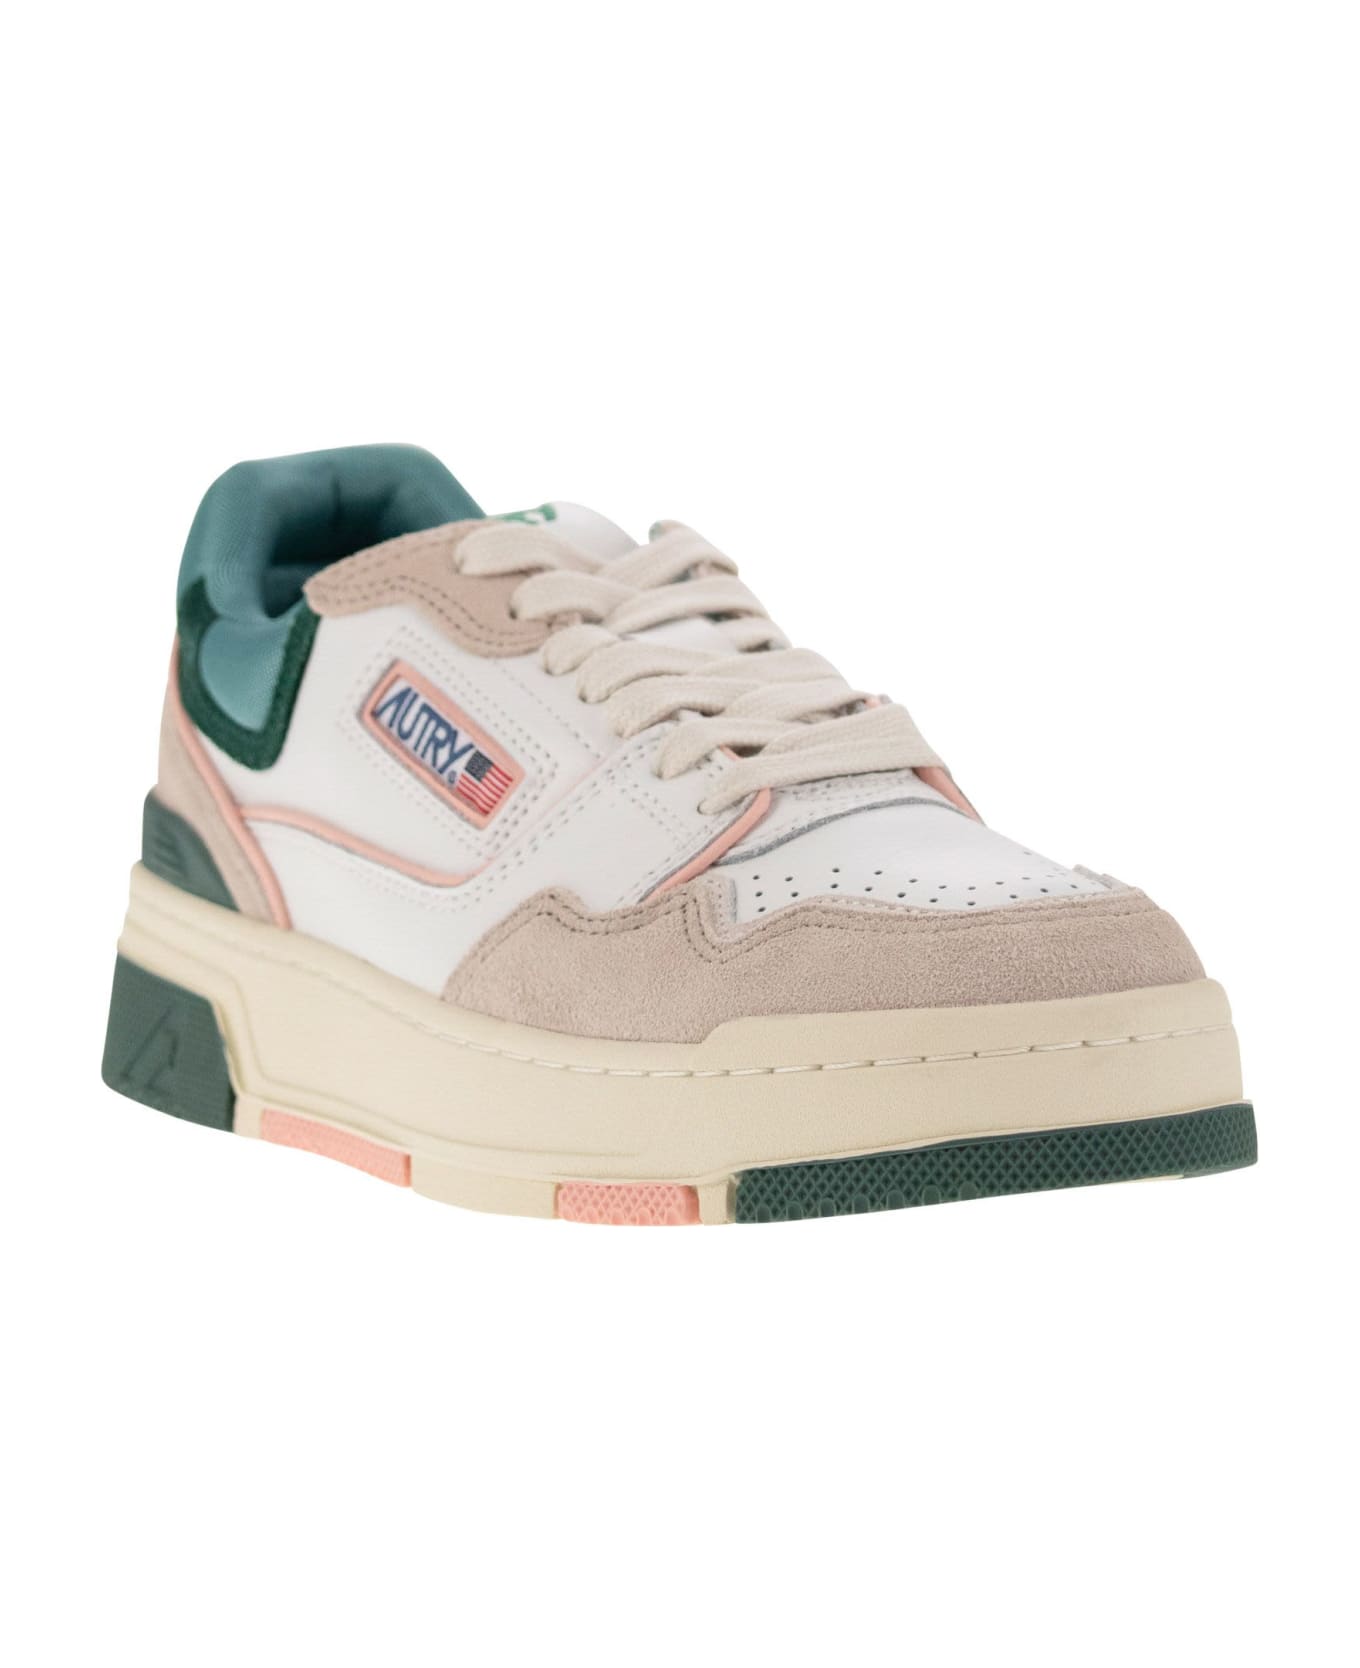 Autry Rookie Clc Low Sneakers - White/green/pink